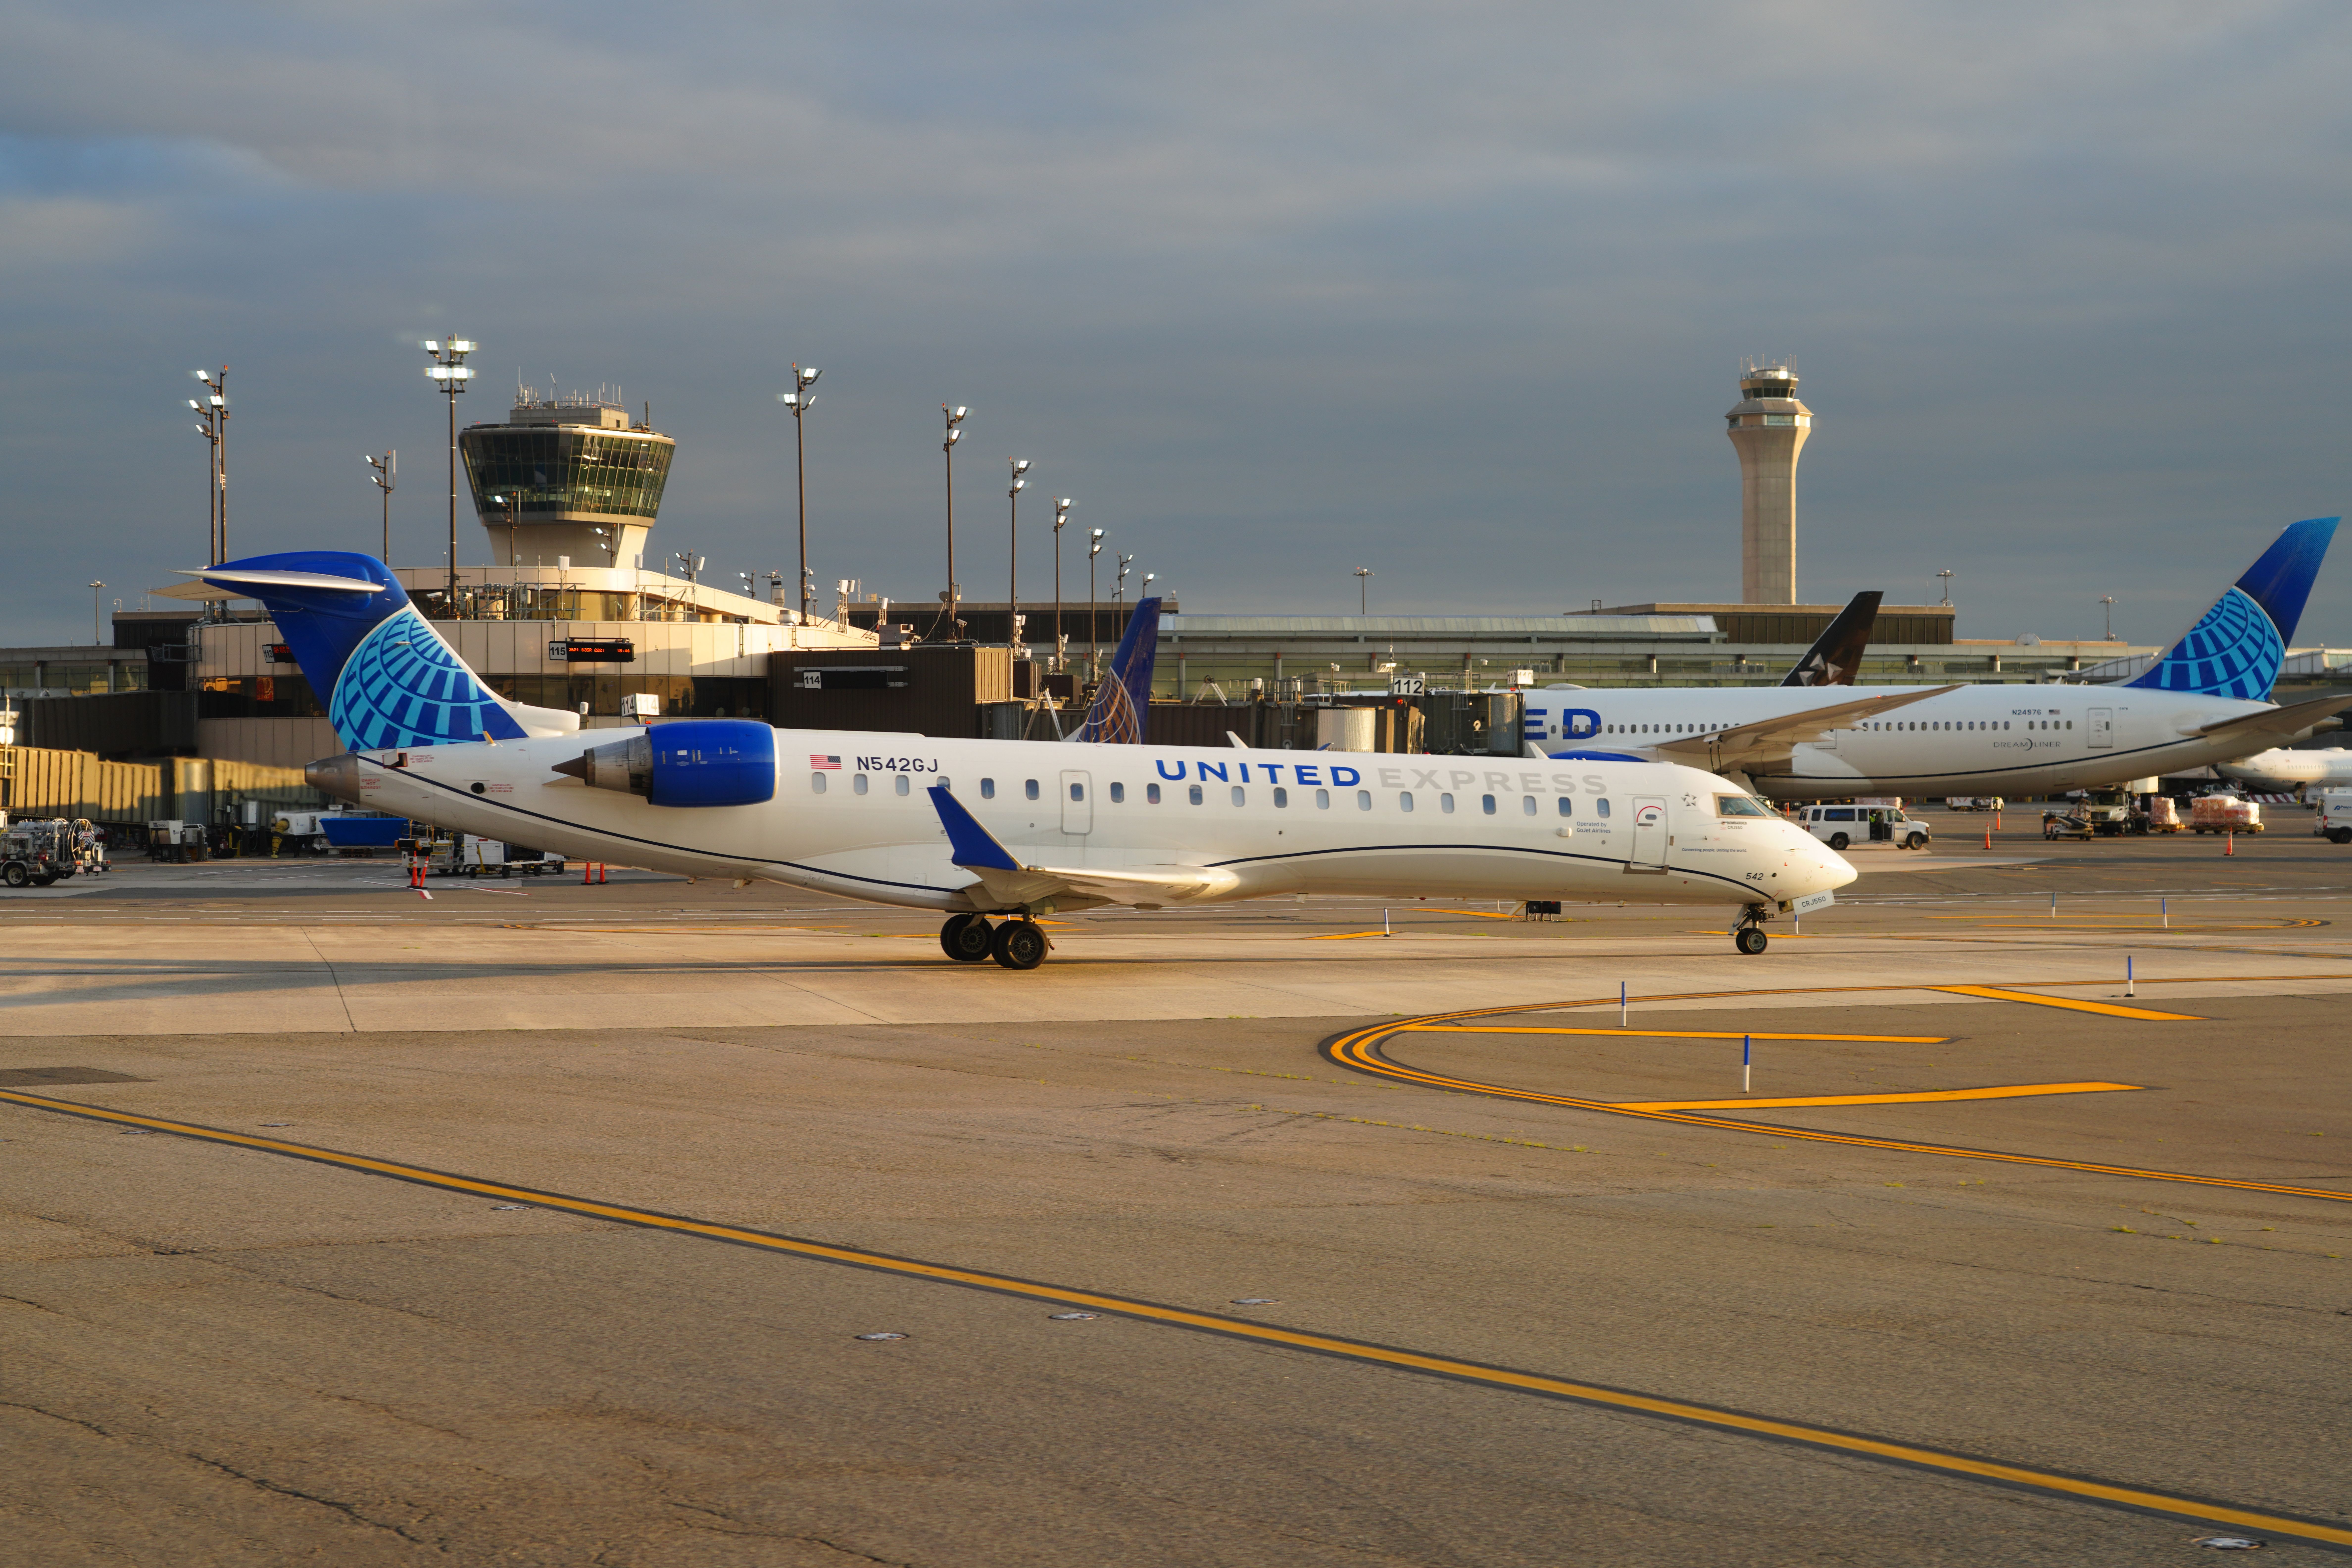 United Express (GoJet Airlines) Bombardier CRJ550 at Newark Liberty International Airport.